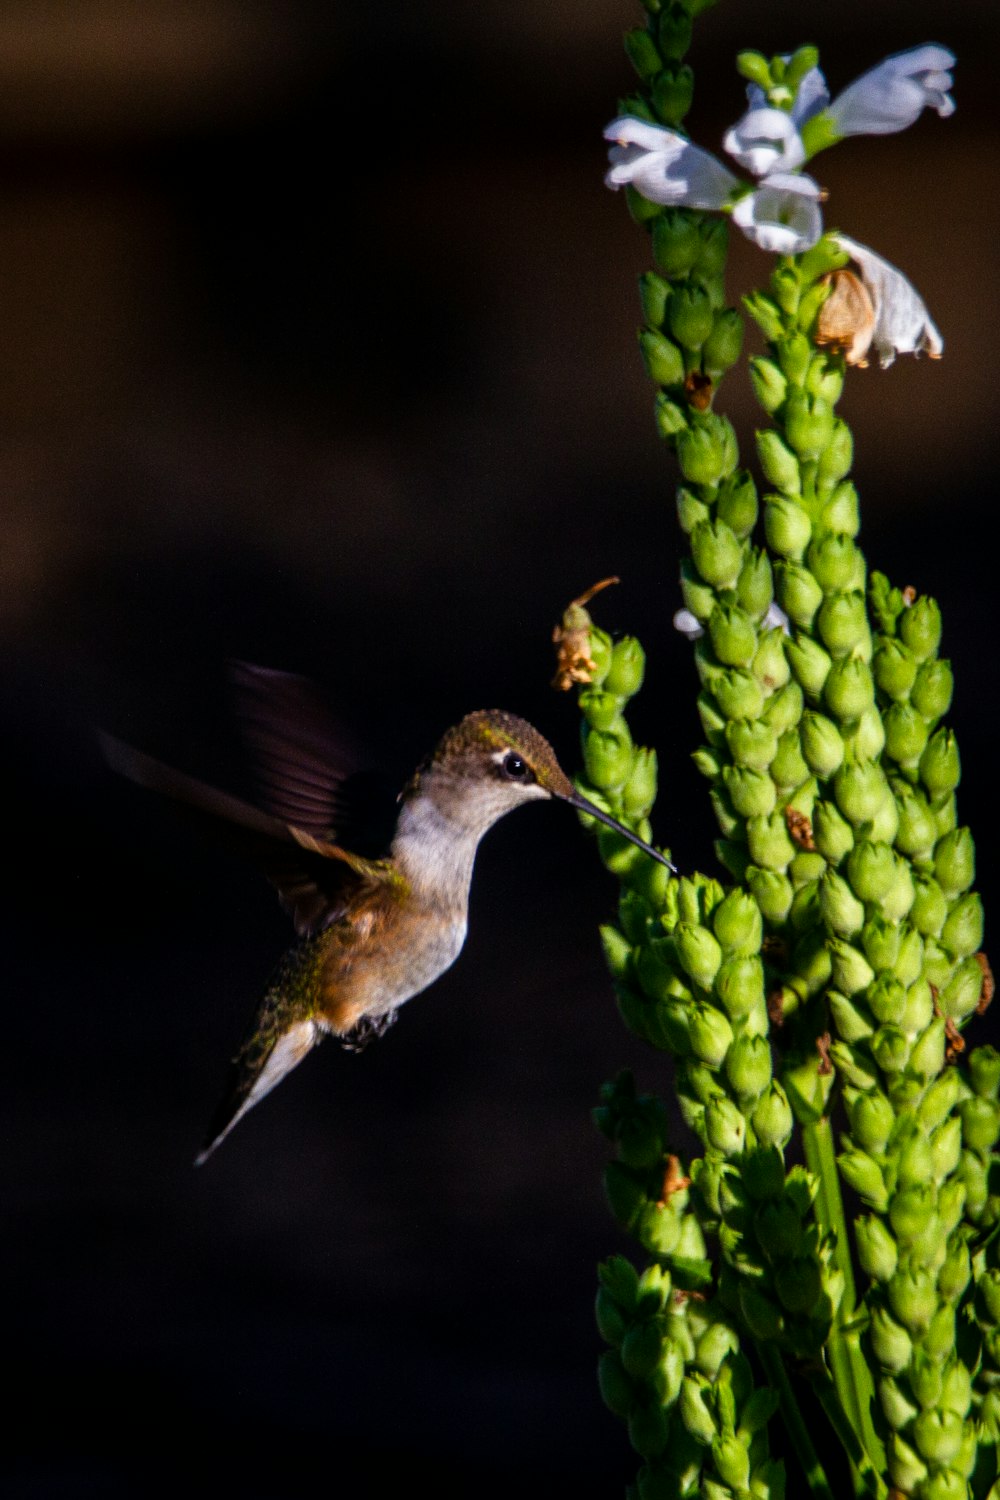 a hummingbird hovering over a green plant with white flowers